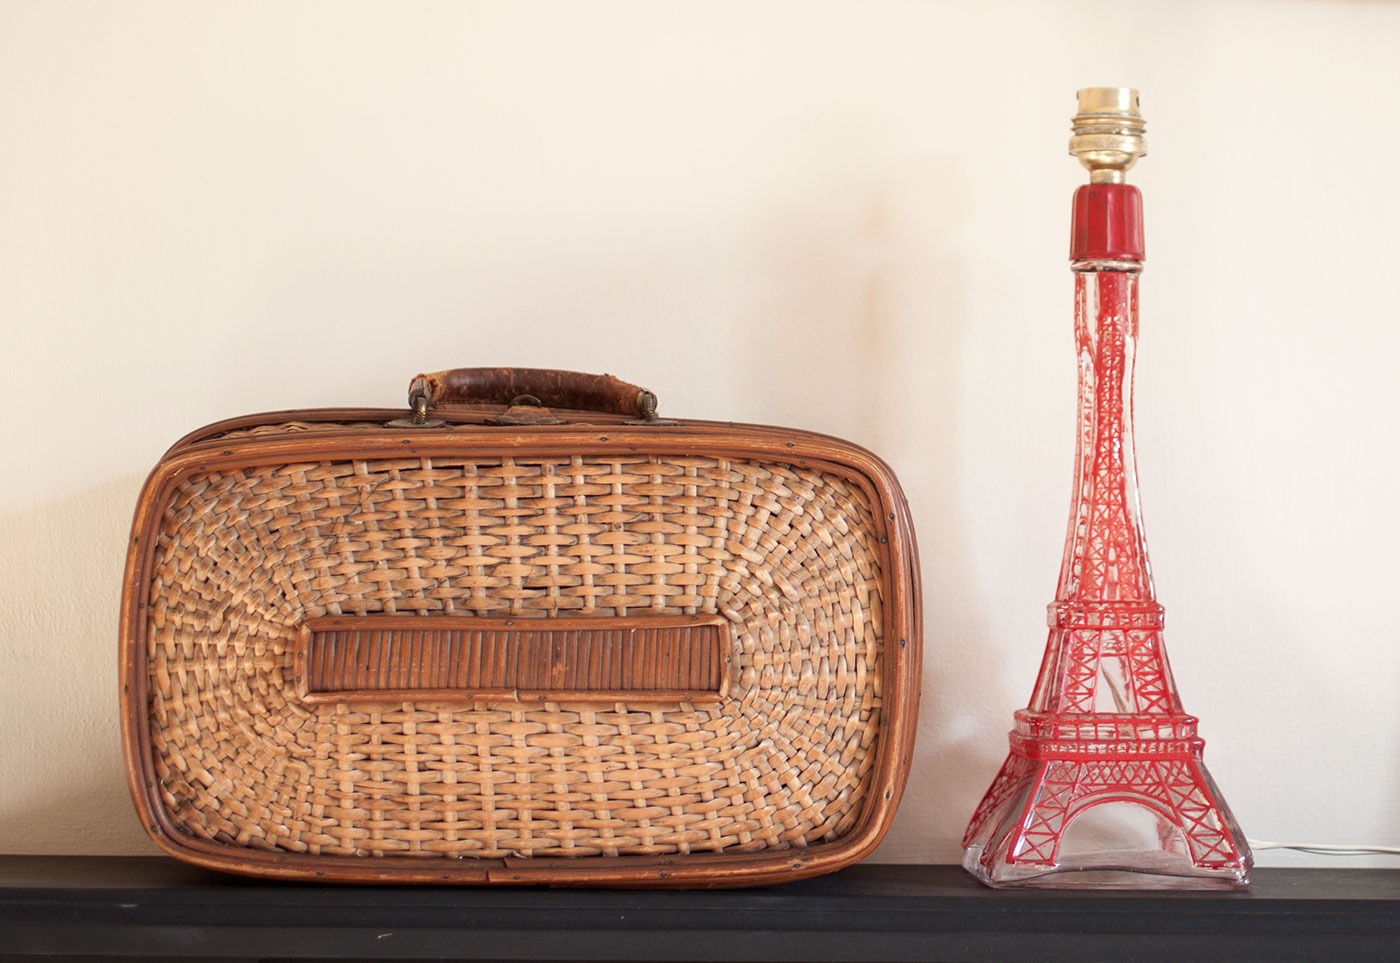 Vintage French basket and Eiffel Tower lamp